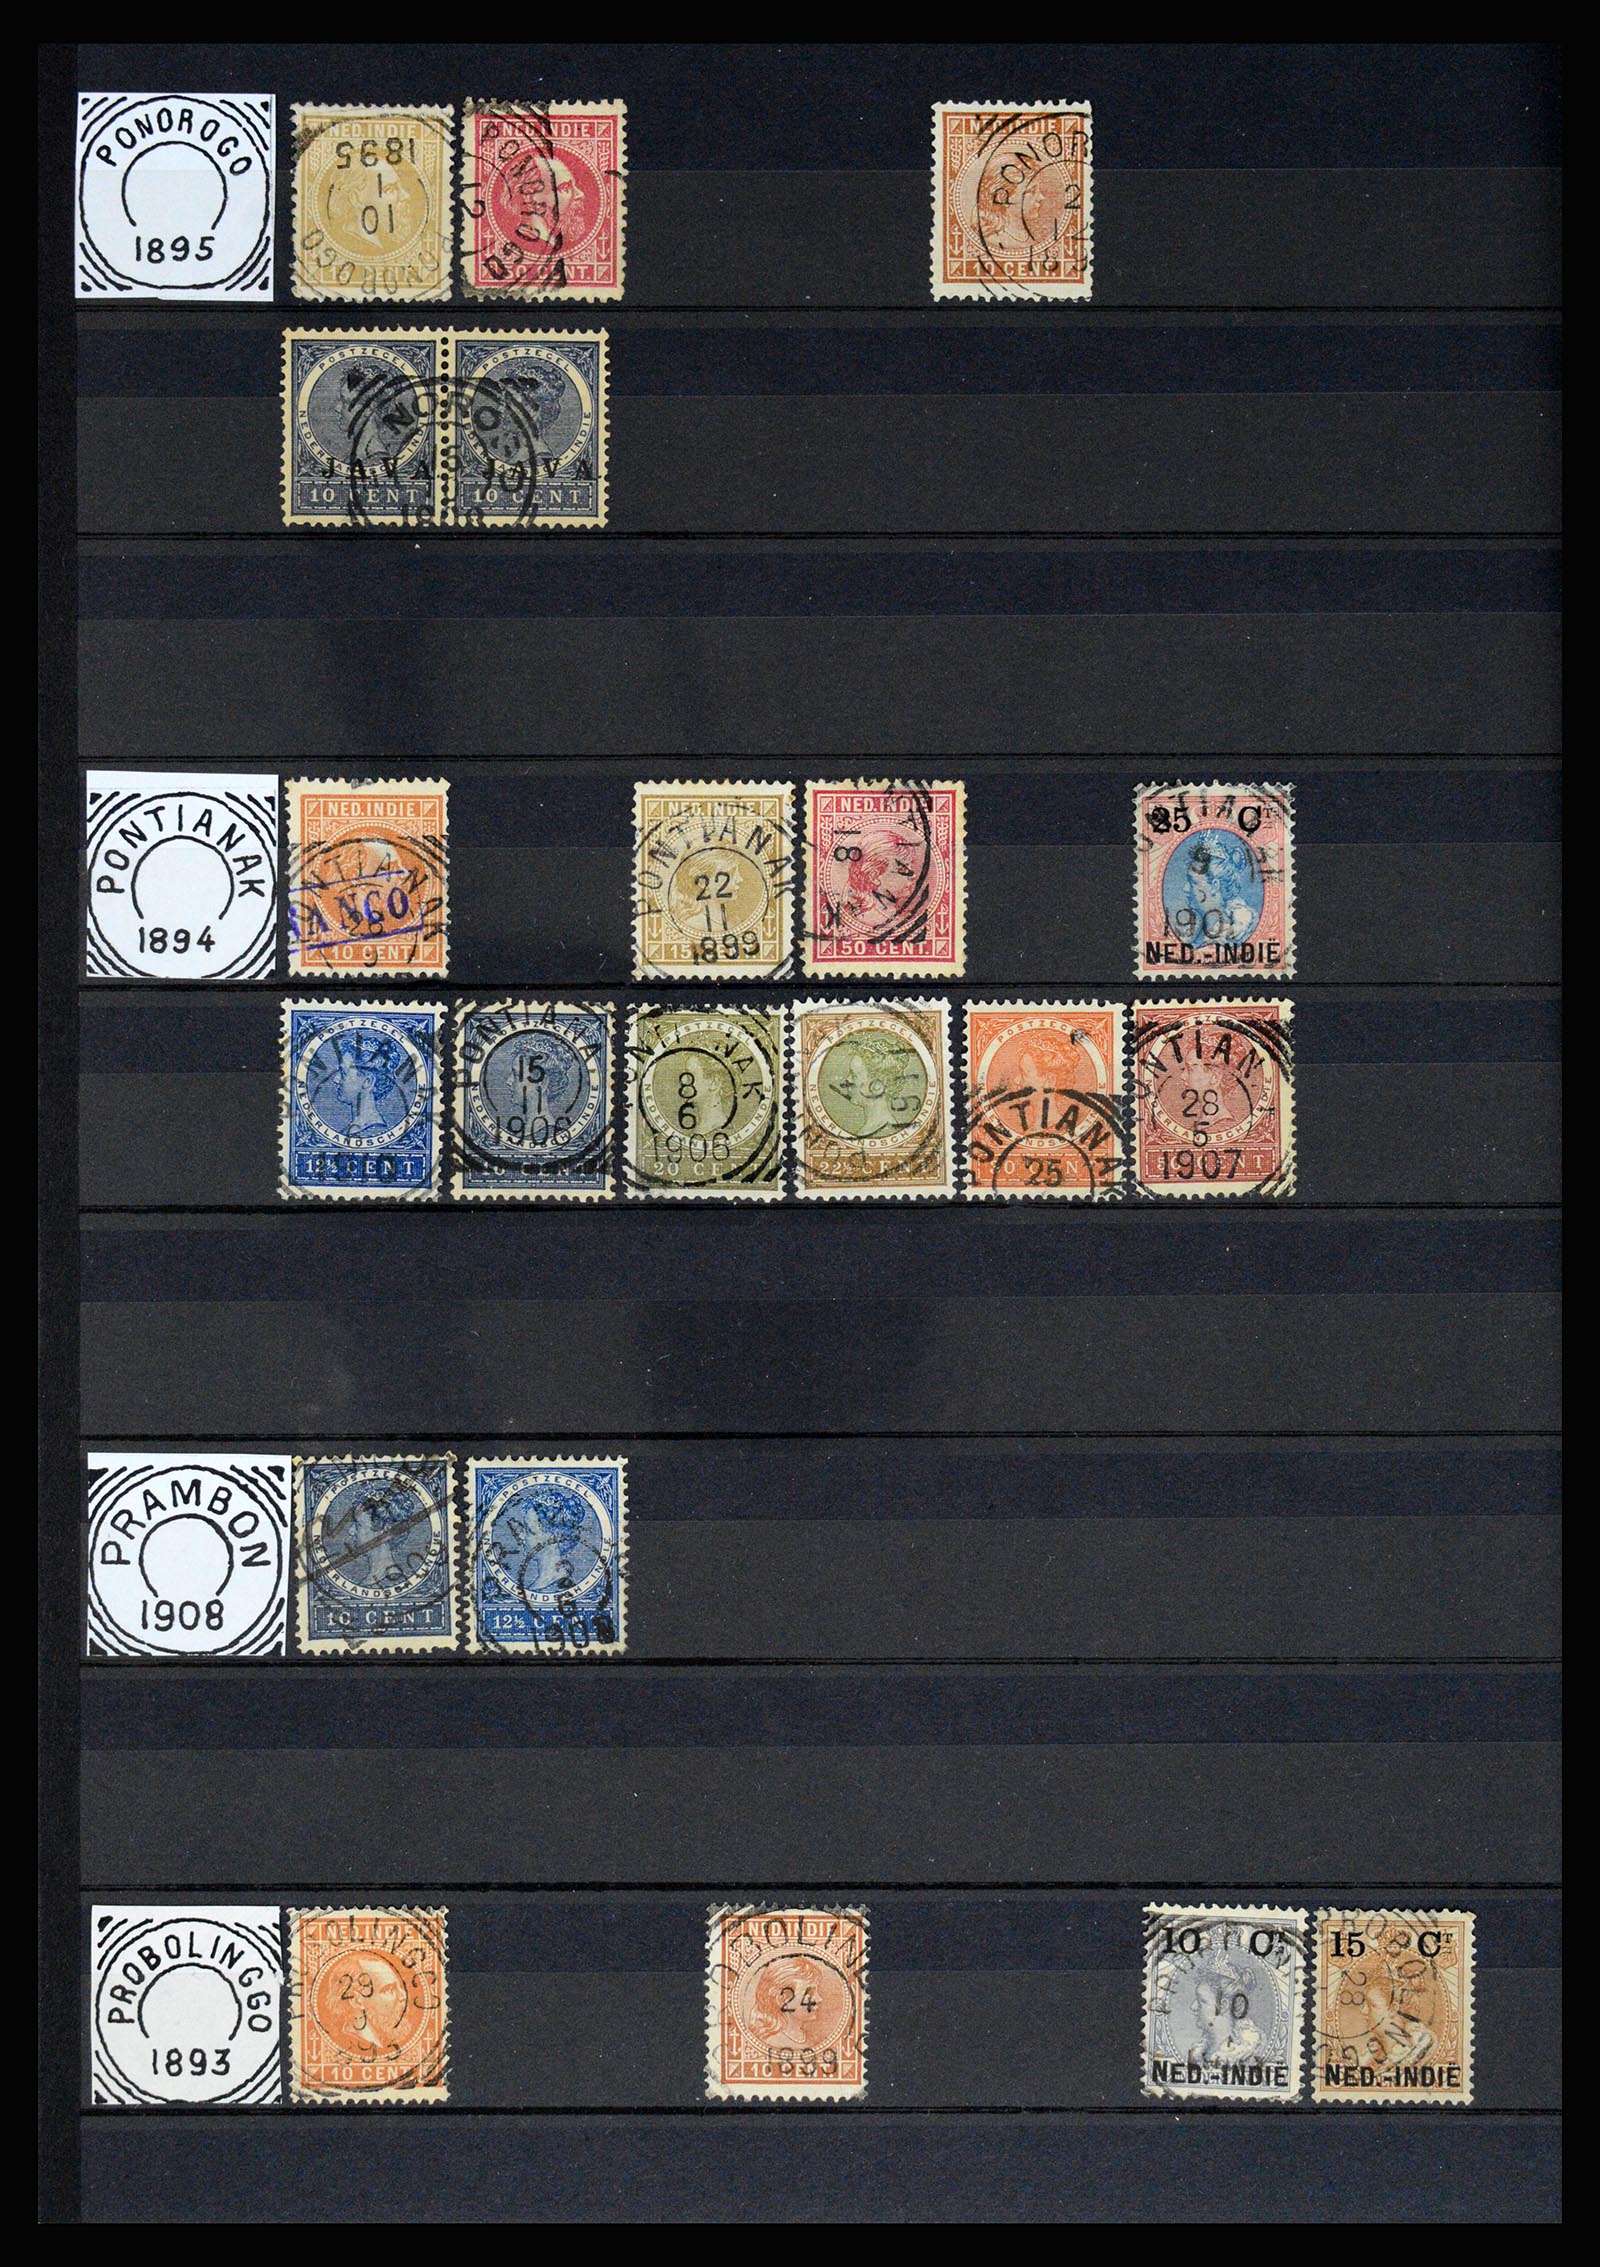 36839 041 - Stamp collection 36839 Dutch east Indies square cancels.